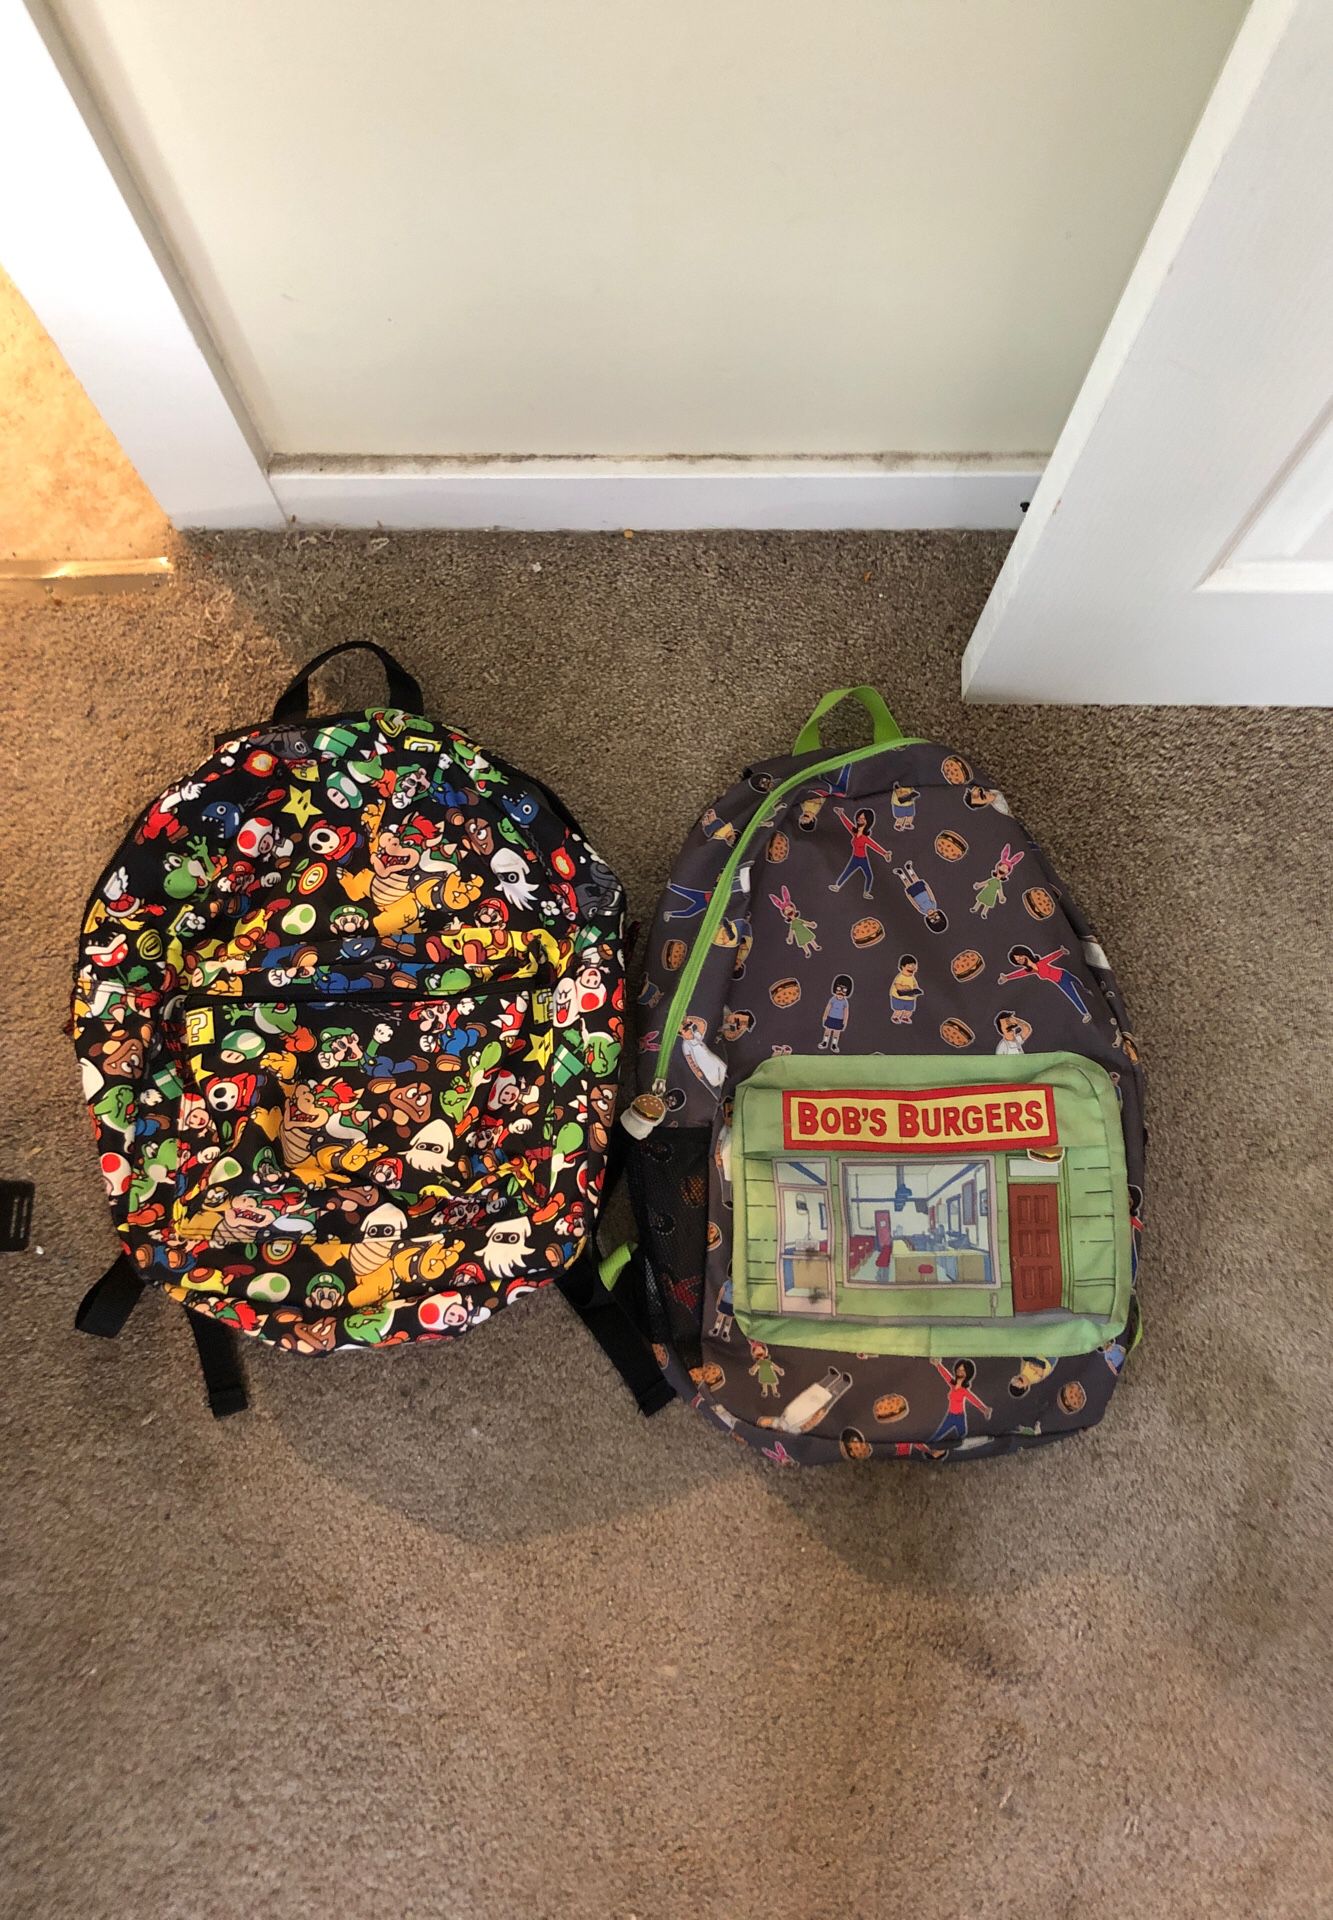 Mario and Bob’s Burgers backpacks (PICKUP ONLY) READ DESCRIPTION